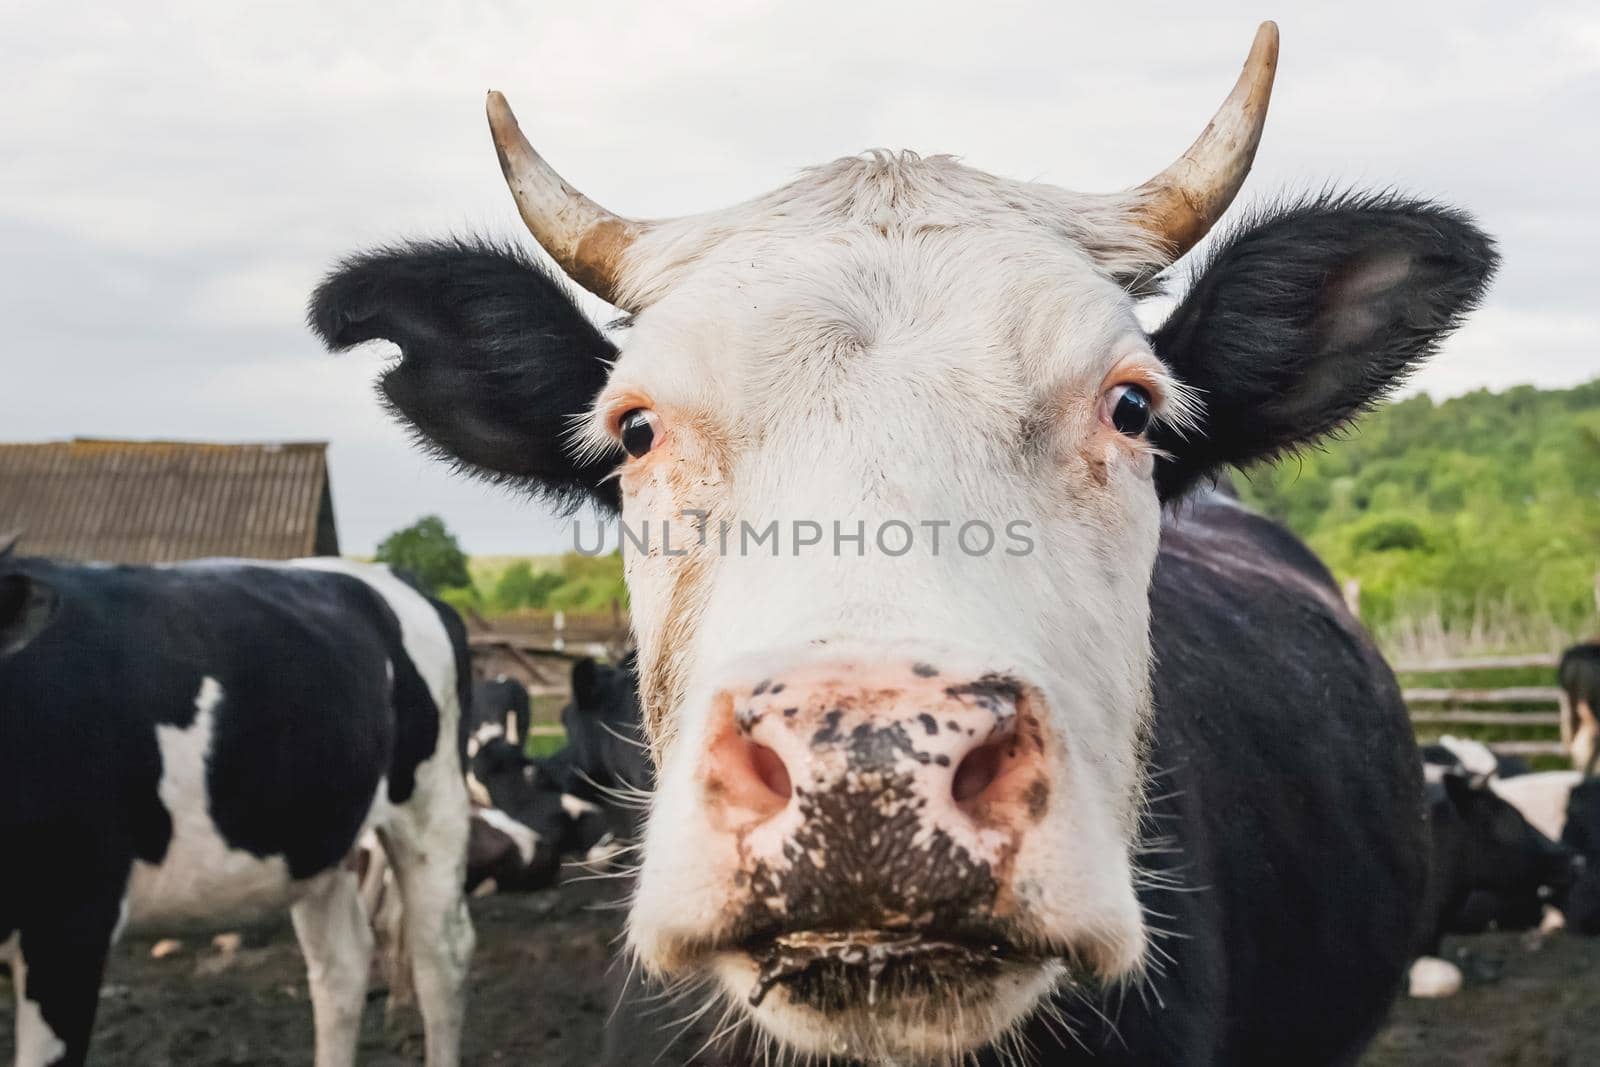 Close up portrait of curious cow among herd of cows and bulls. Dairy farm animals are grazing in paddock. Animal husbandry in countryside.